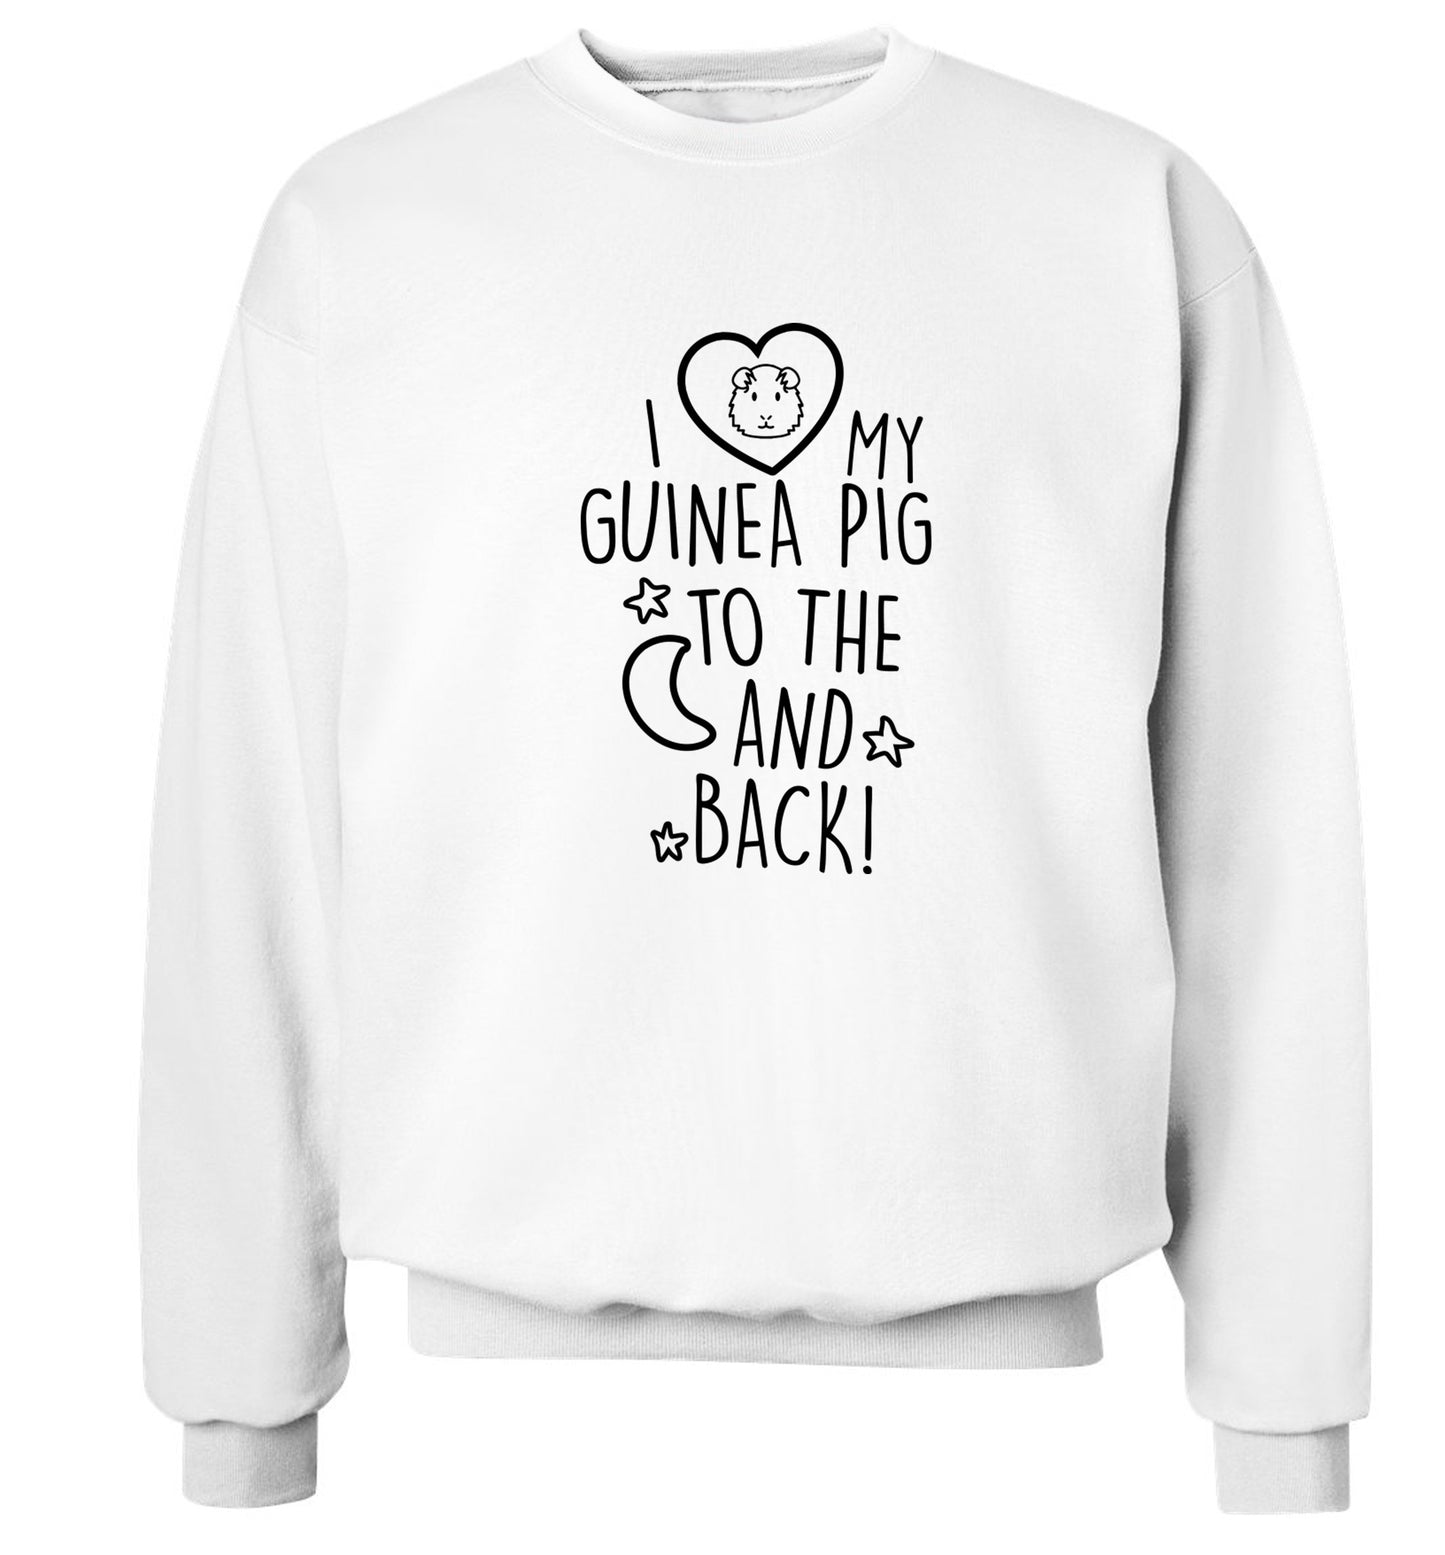 I love my guinea pig to the moon and back Adult's unisex white  sweater 2XL